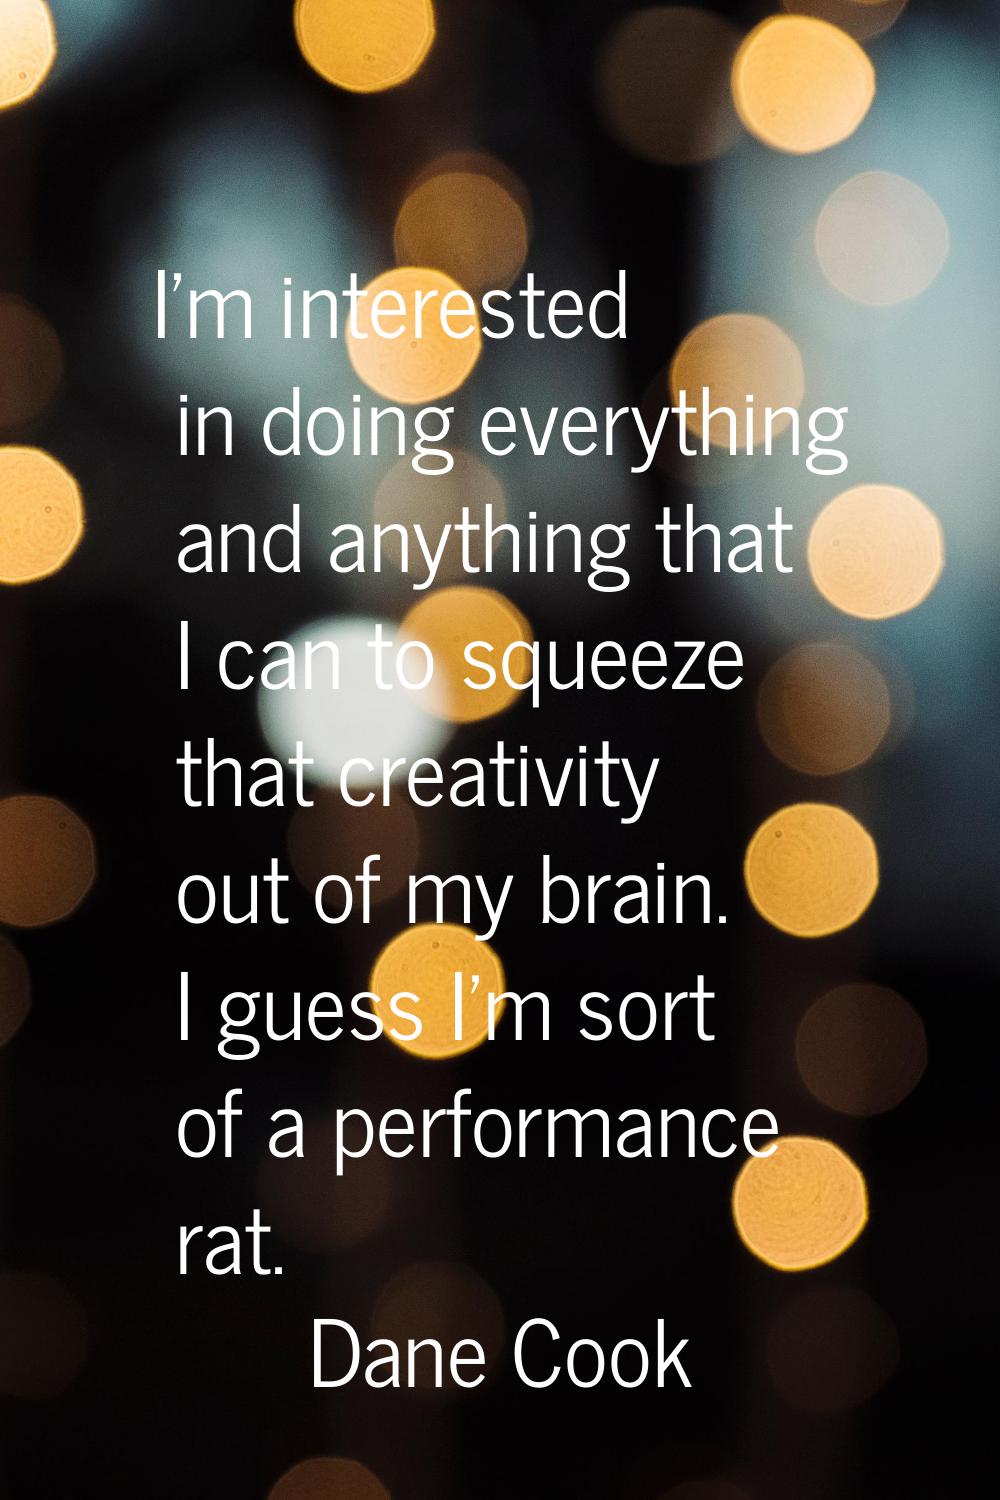 I'm interested in doing everything and anything that I can to squeeze that creativity out of my bra